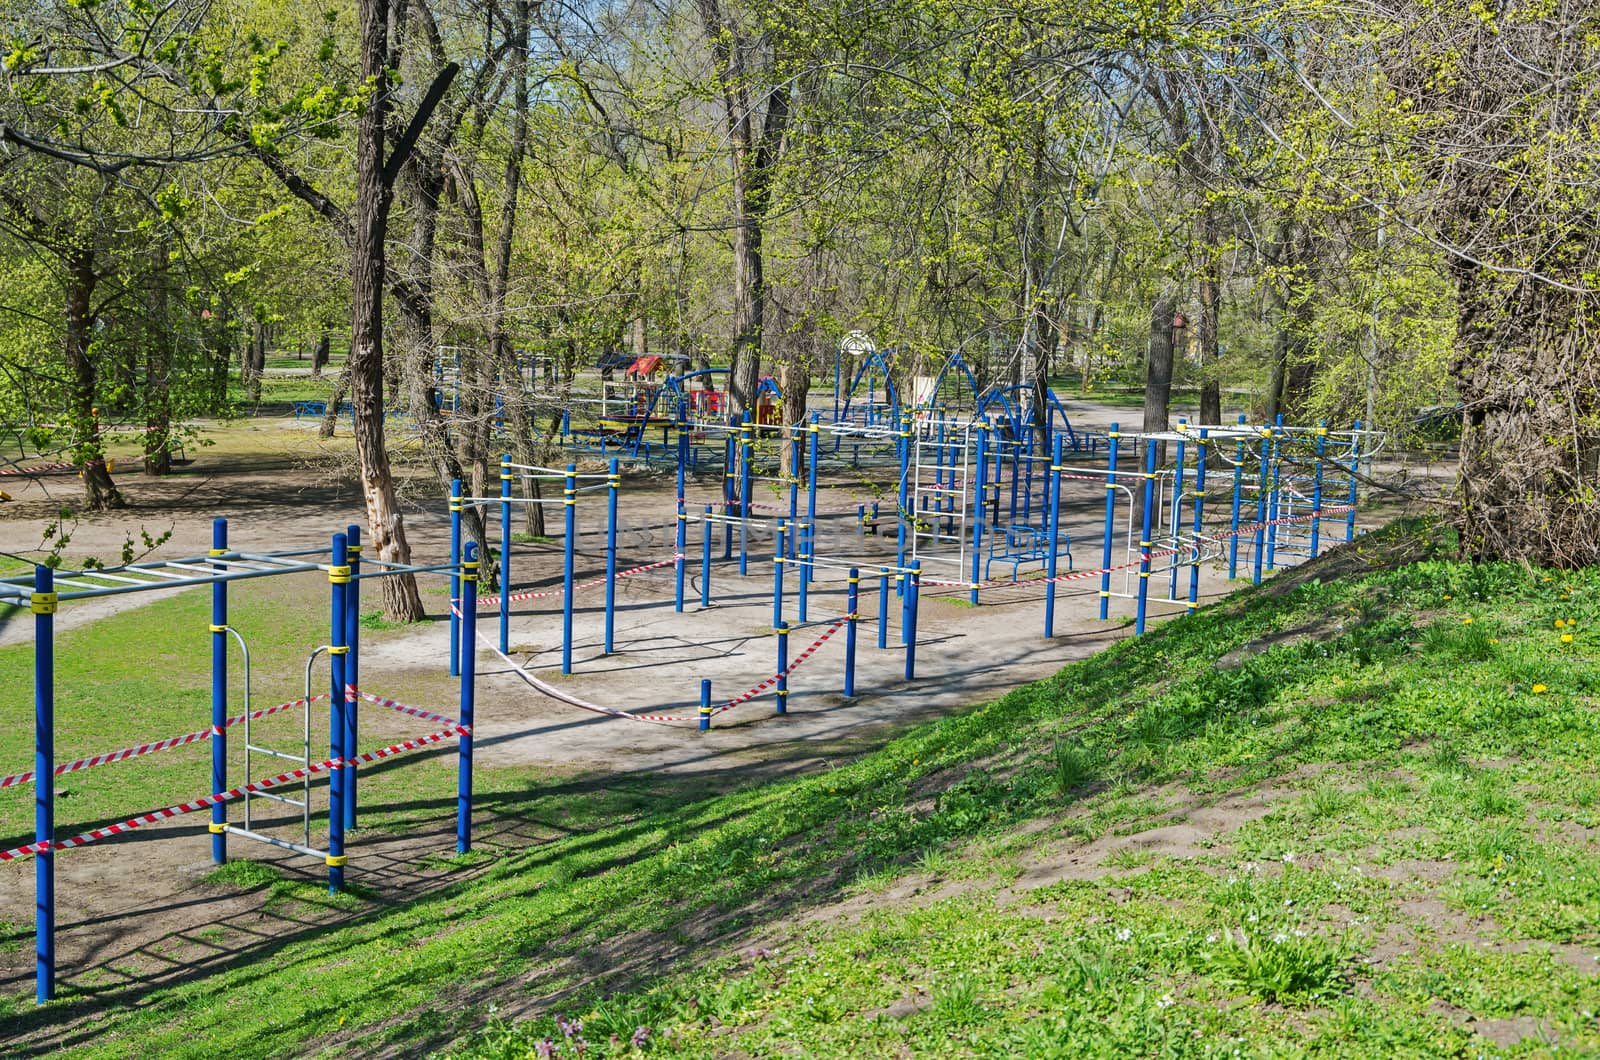 Sports playground in old city park is fenced with barricade tape during COVID-19 coronavirus infection pandemic. It is forbidden to be in public places during quarantine